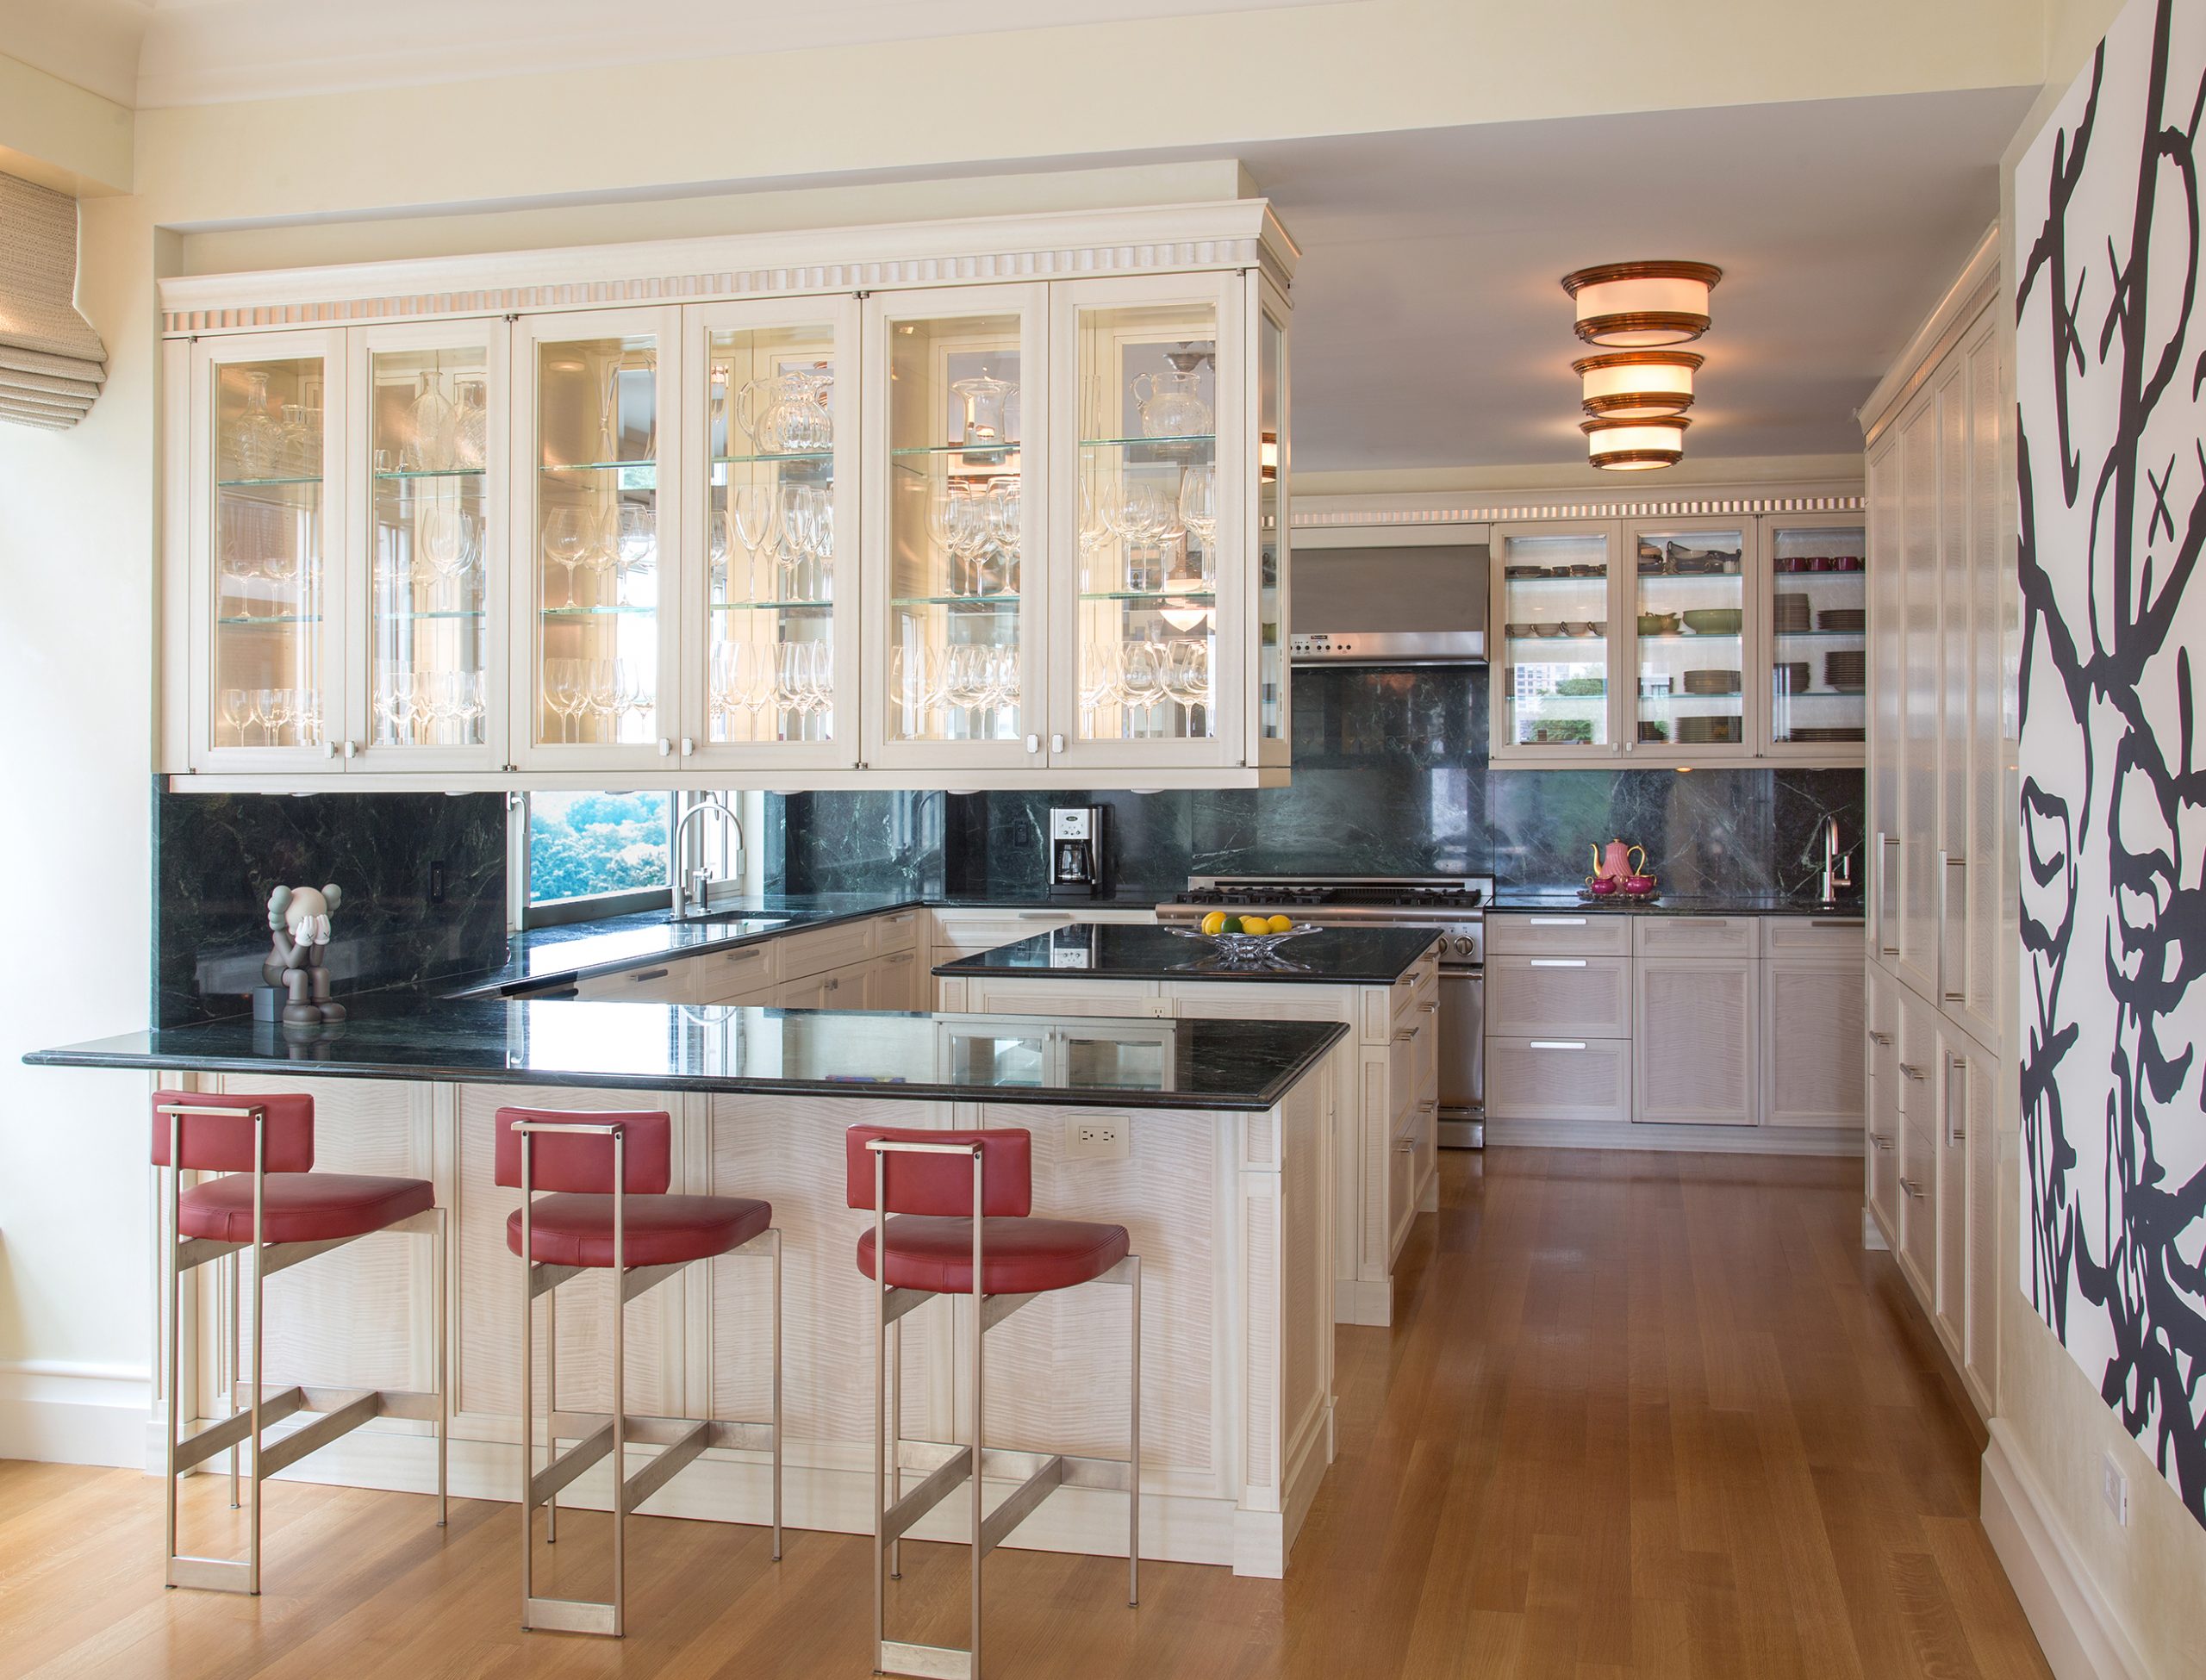 5 Central Park West, Kitchen Design by Interior designer Kevin Gray, Kevin Gray Design, Photo by Robin Hill